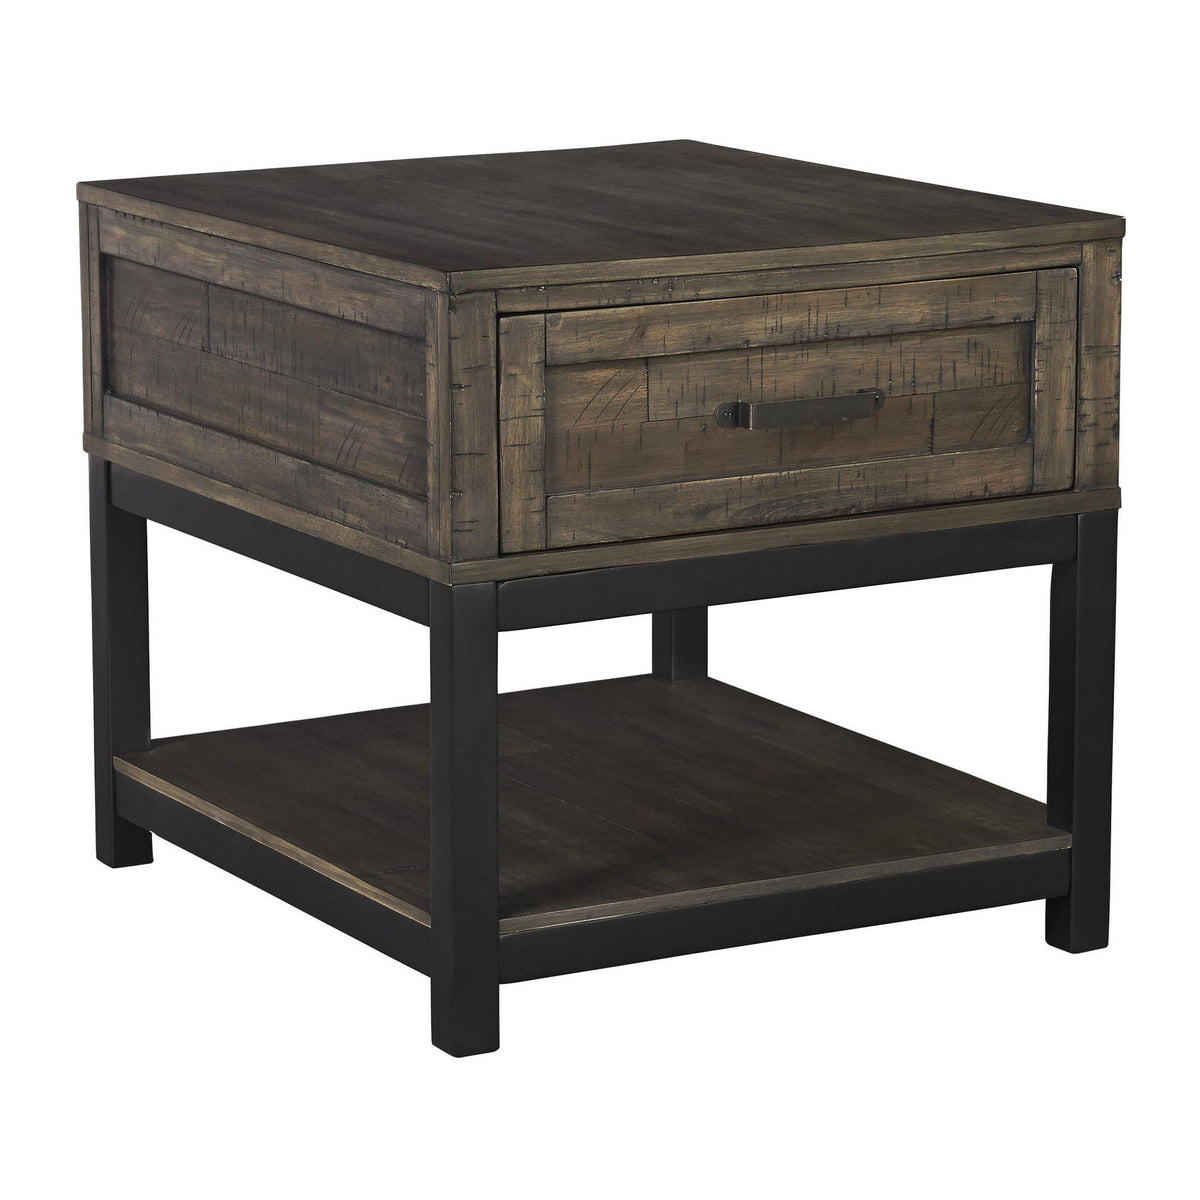 Two Tone Wooden End Table with 1 Drawer and Metal Base in Brown and Black - BM213288